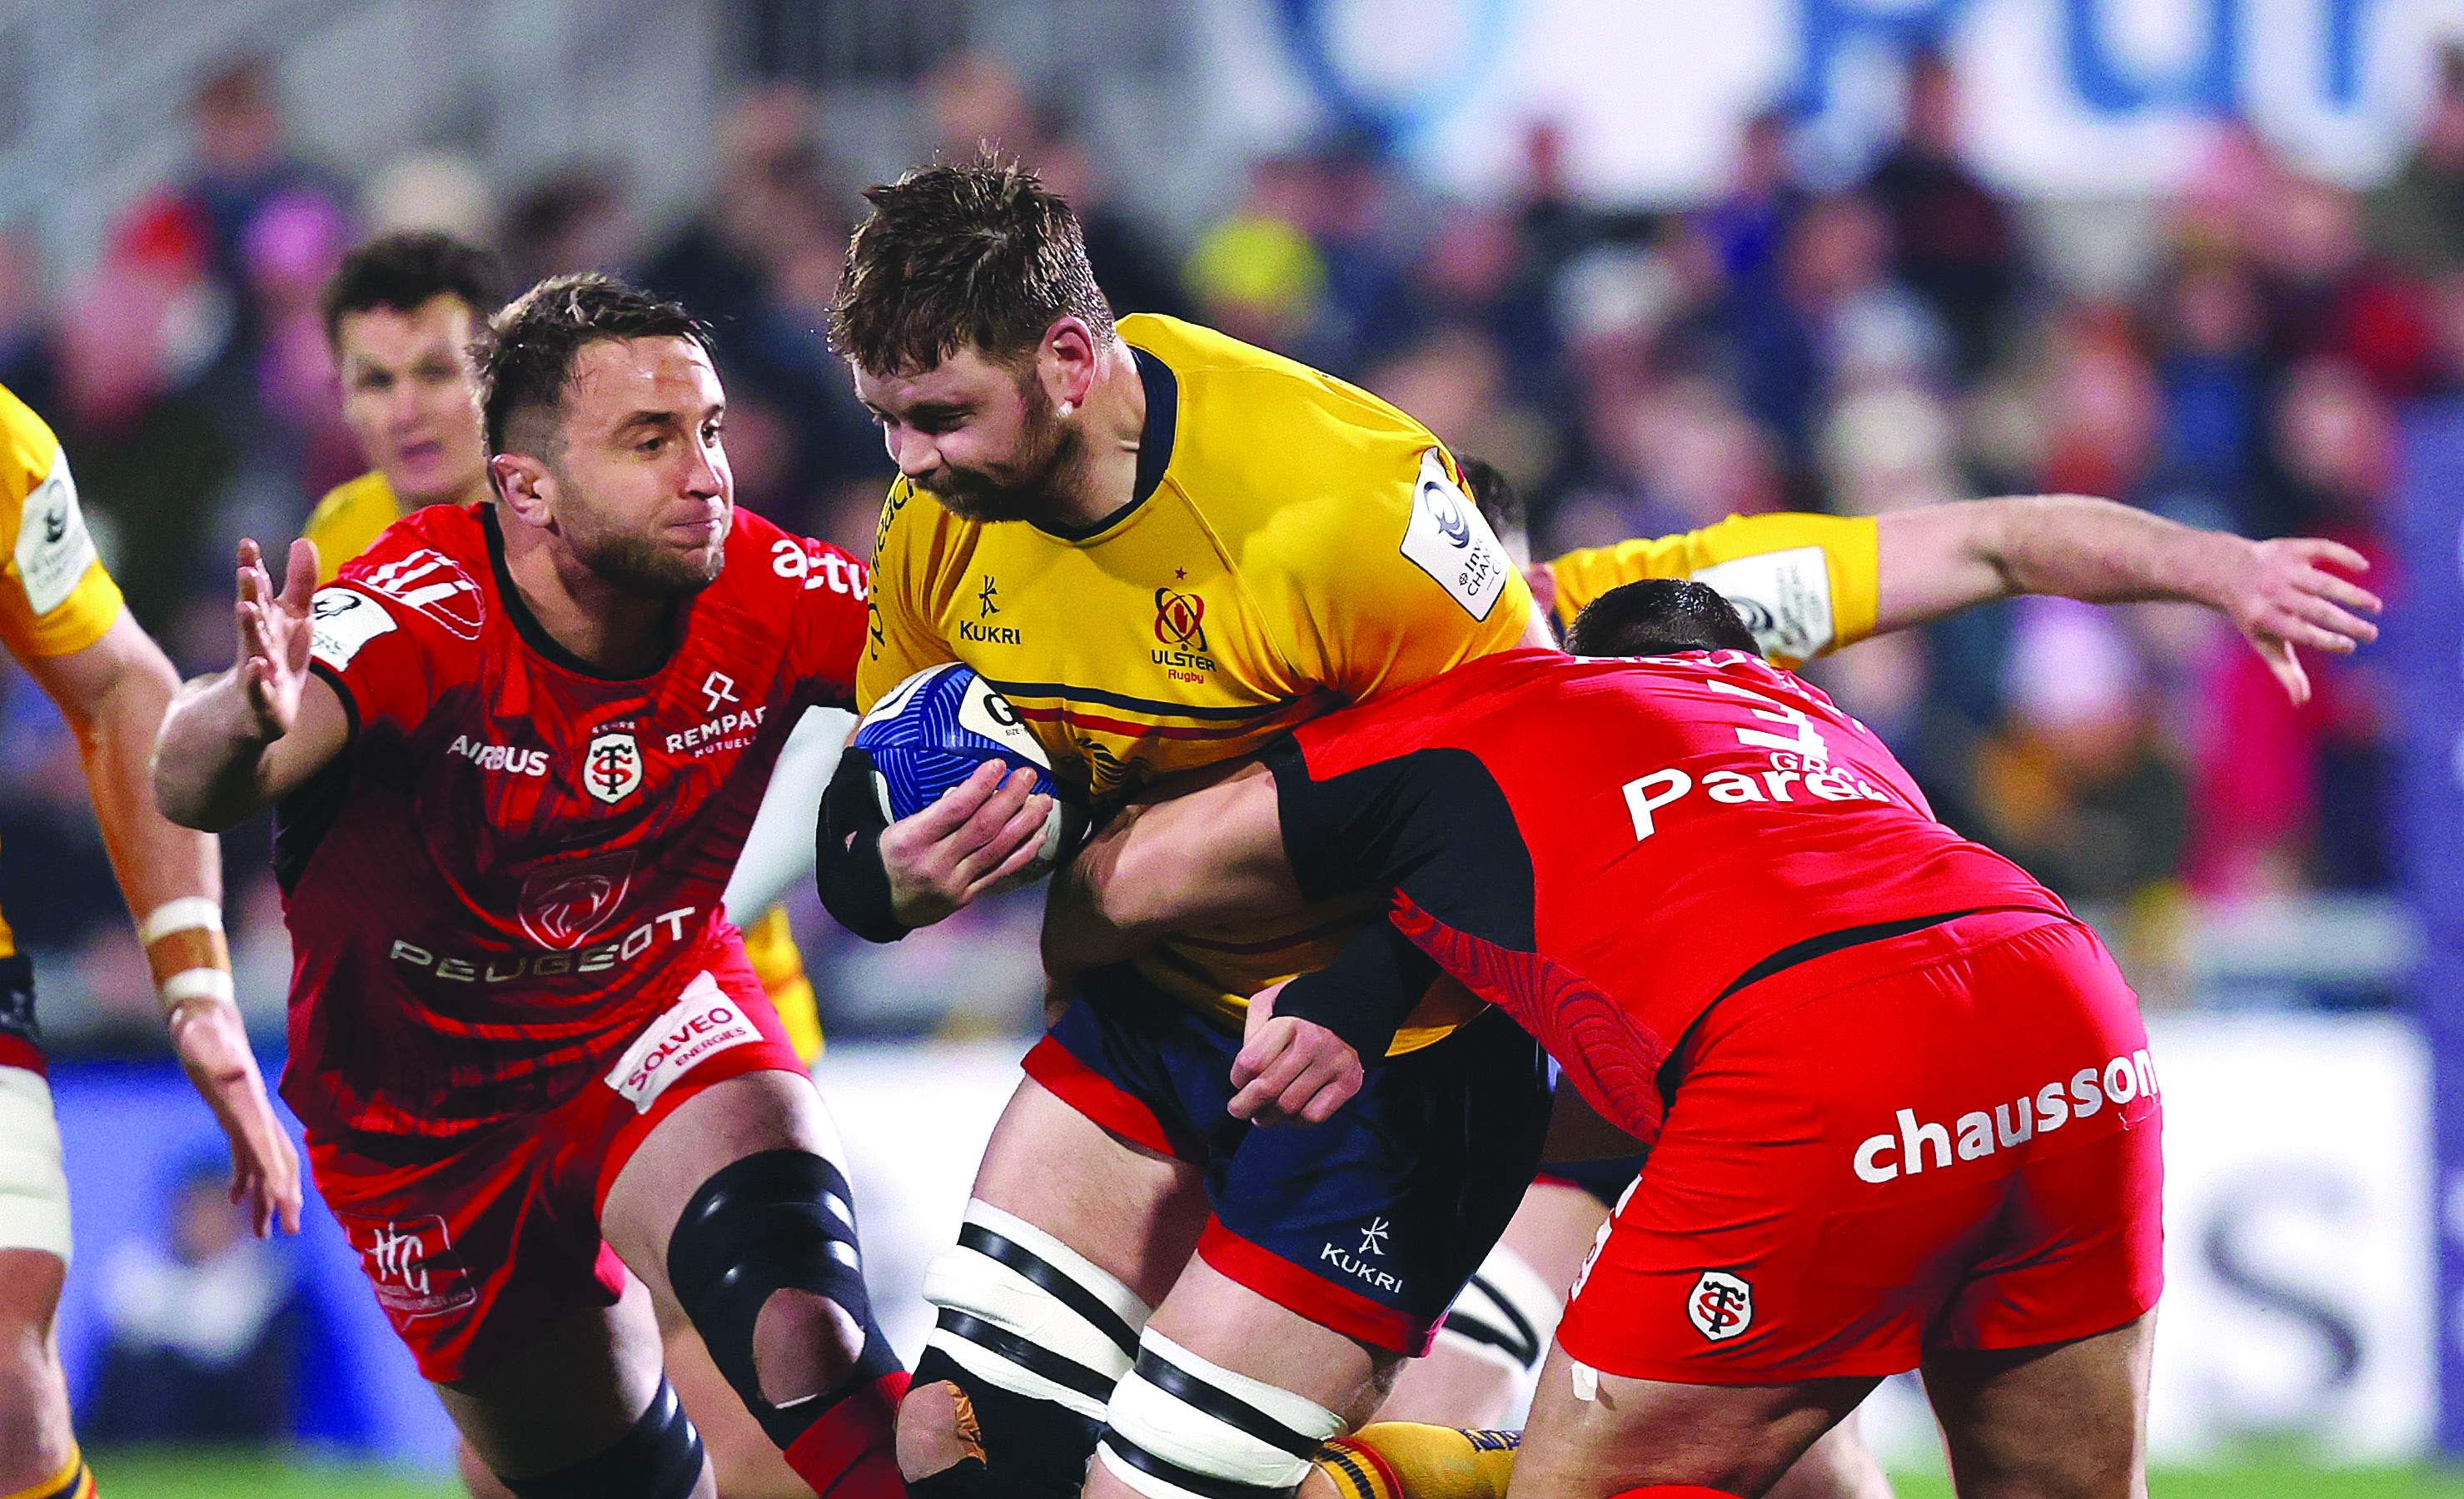 Iain Henderson insists Ulster must put last week’s defeat to Toulouse behind them ahead of Saturday’s trip to London